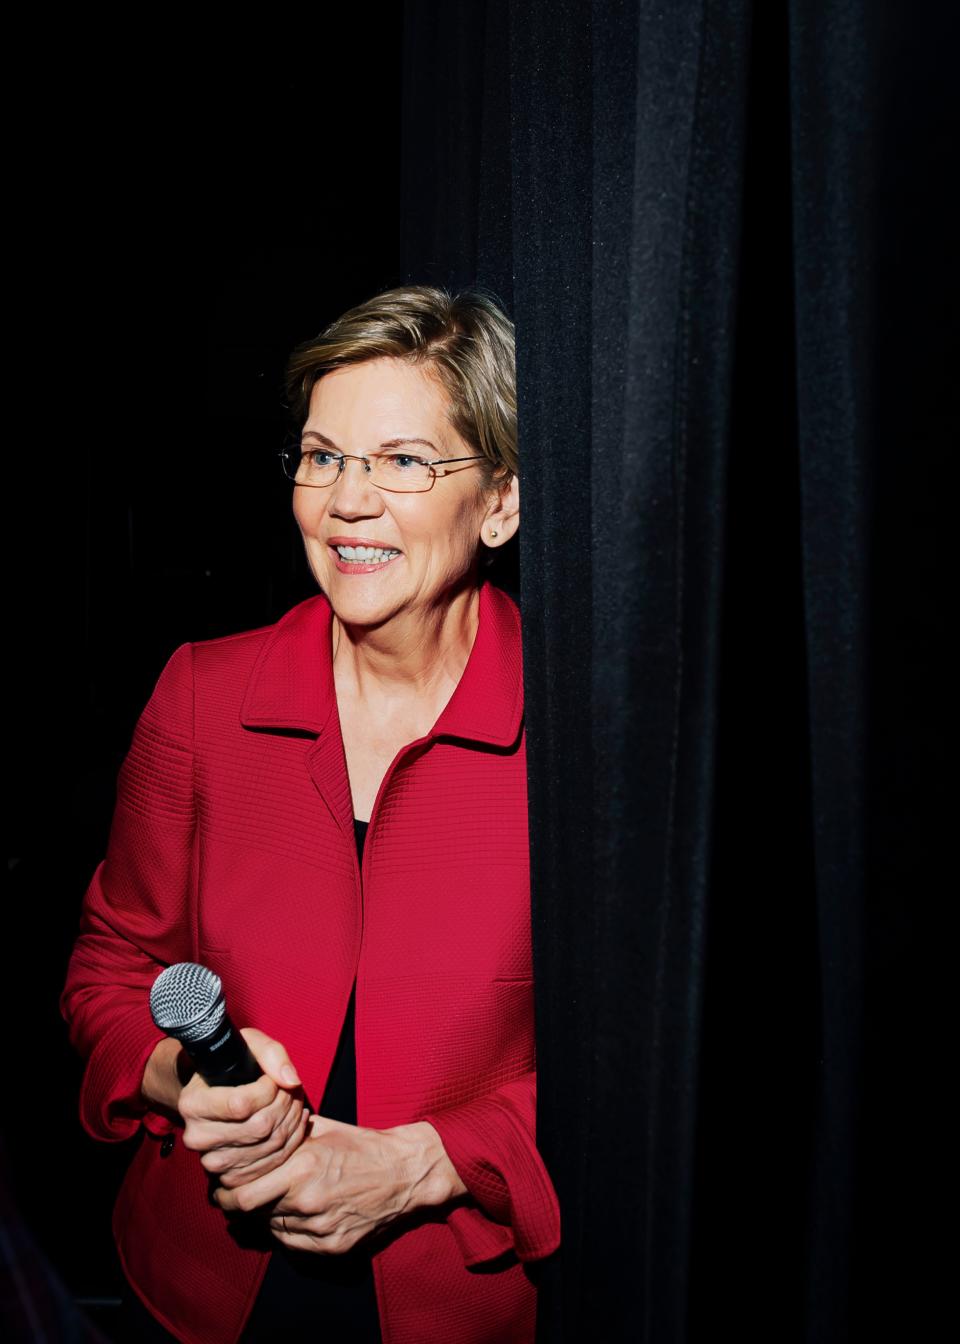 When she speaks on stage, Warren insists that the house lights are turned up to illuminate the audience. "This is not a performance, this is a chance to engage," she says, "and I need to see faces when I’m talking through that.”